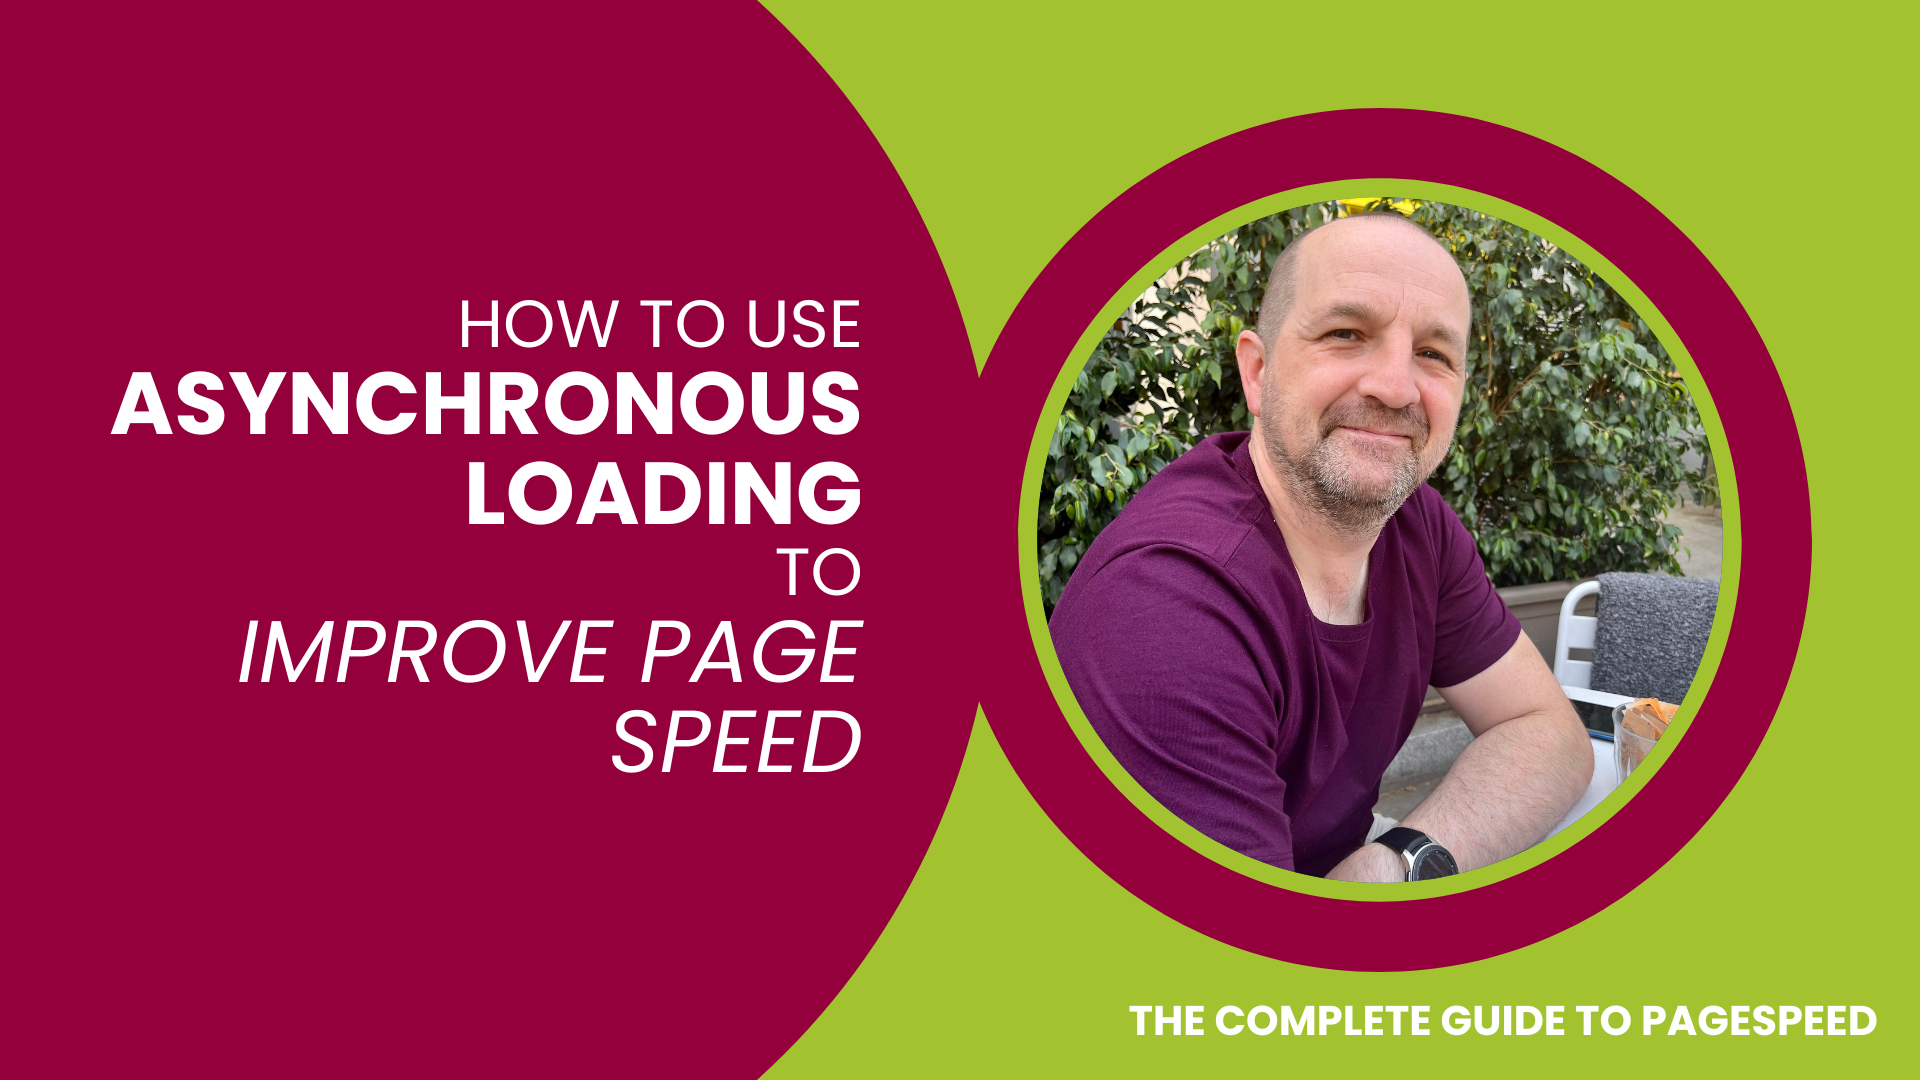 How to Use Asynchronous Loading to Improve Page Speed